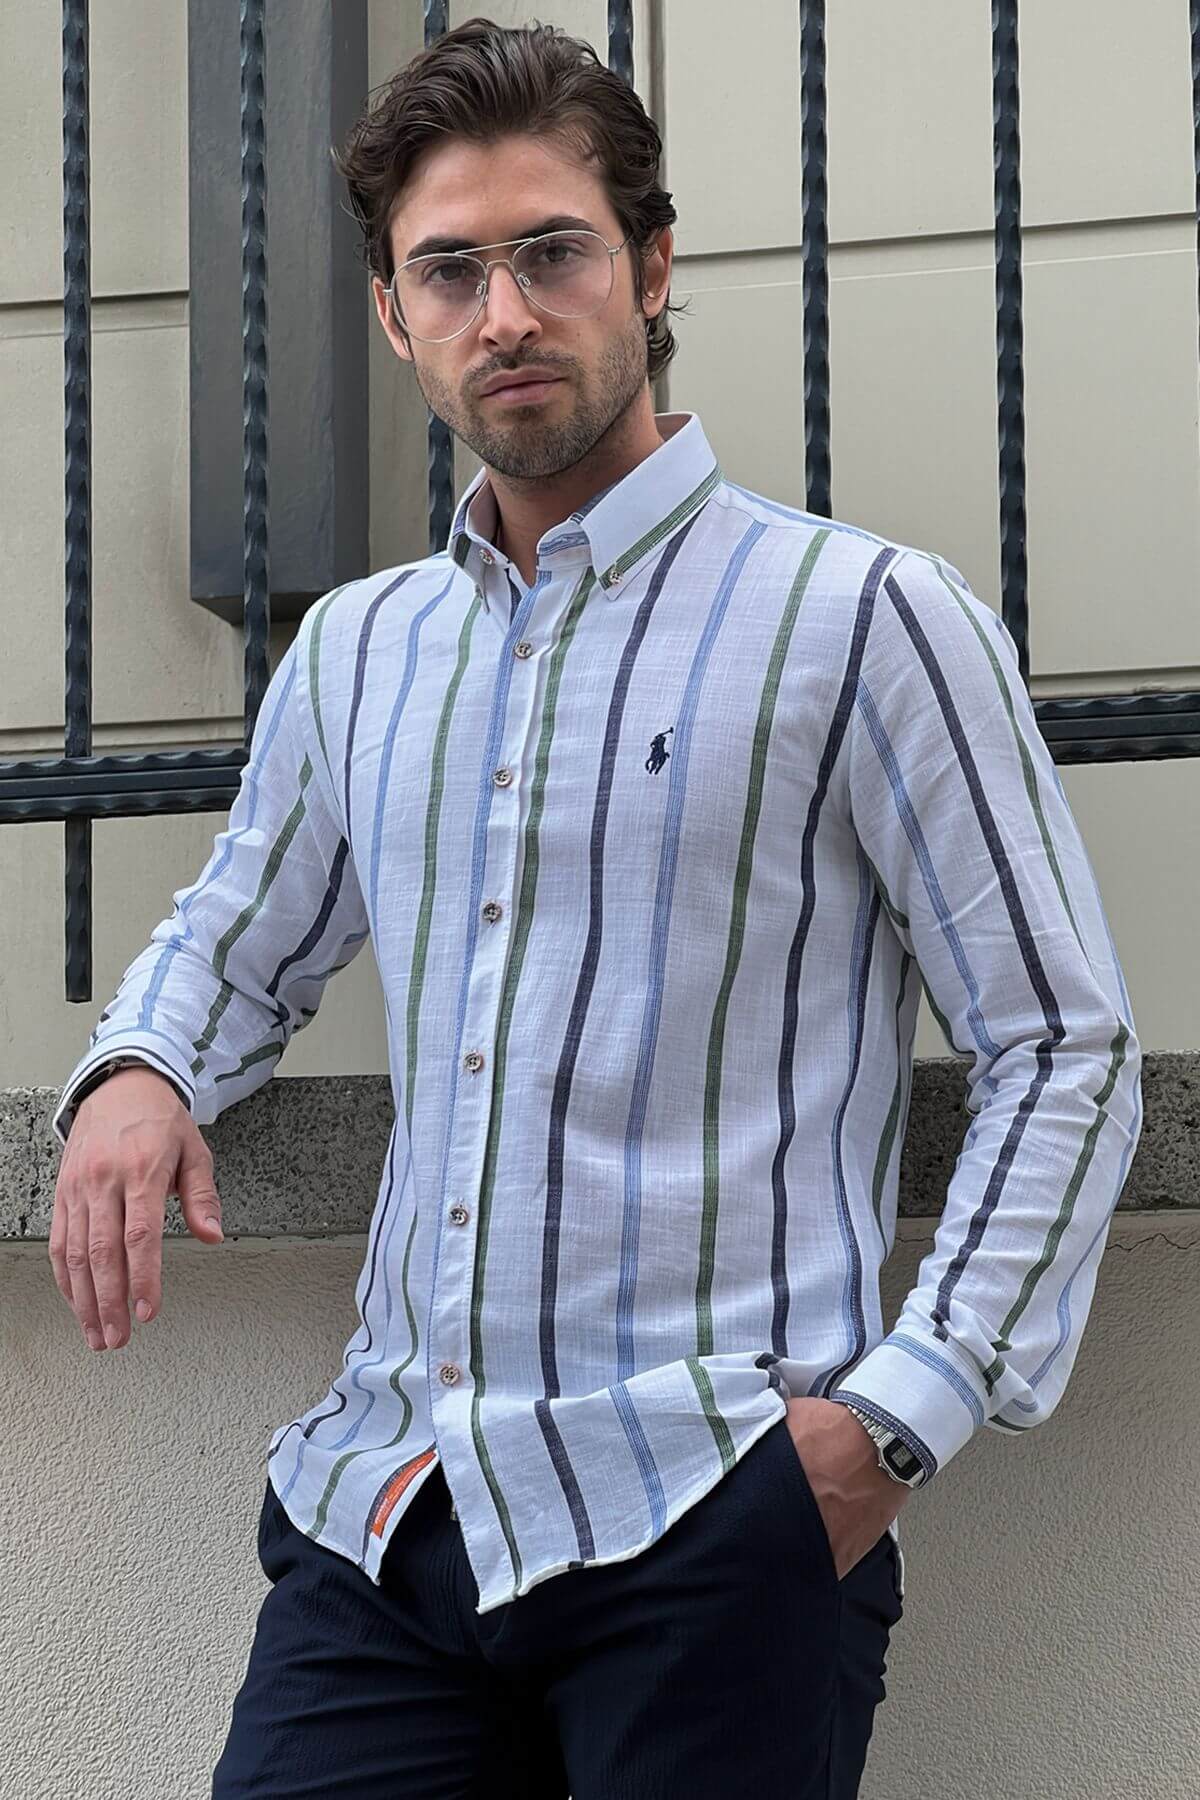 A White and Green Cotton Shirt on display